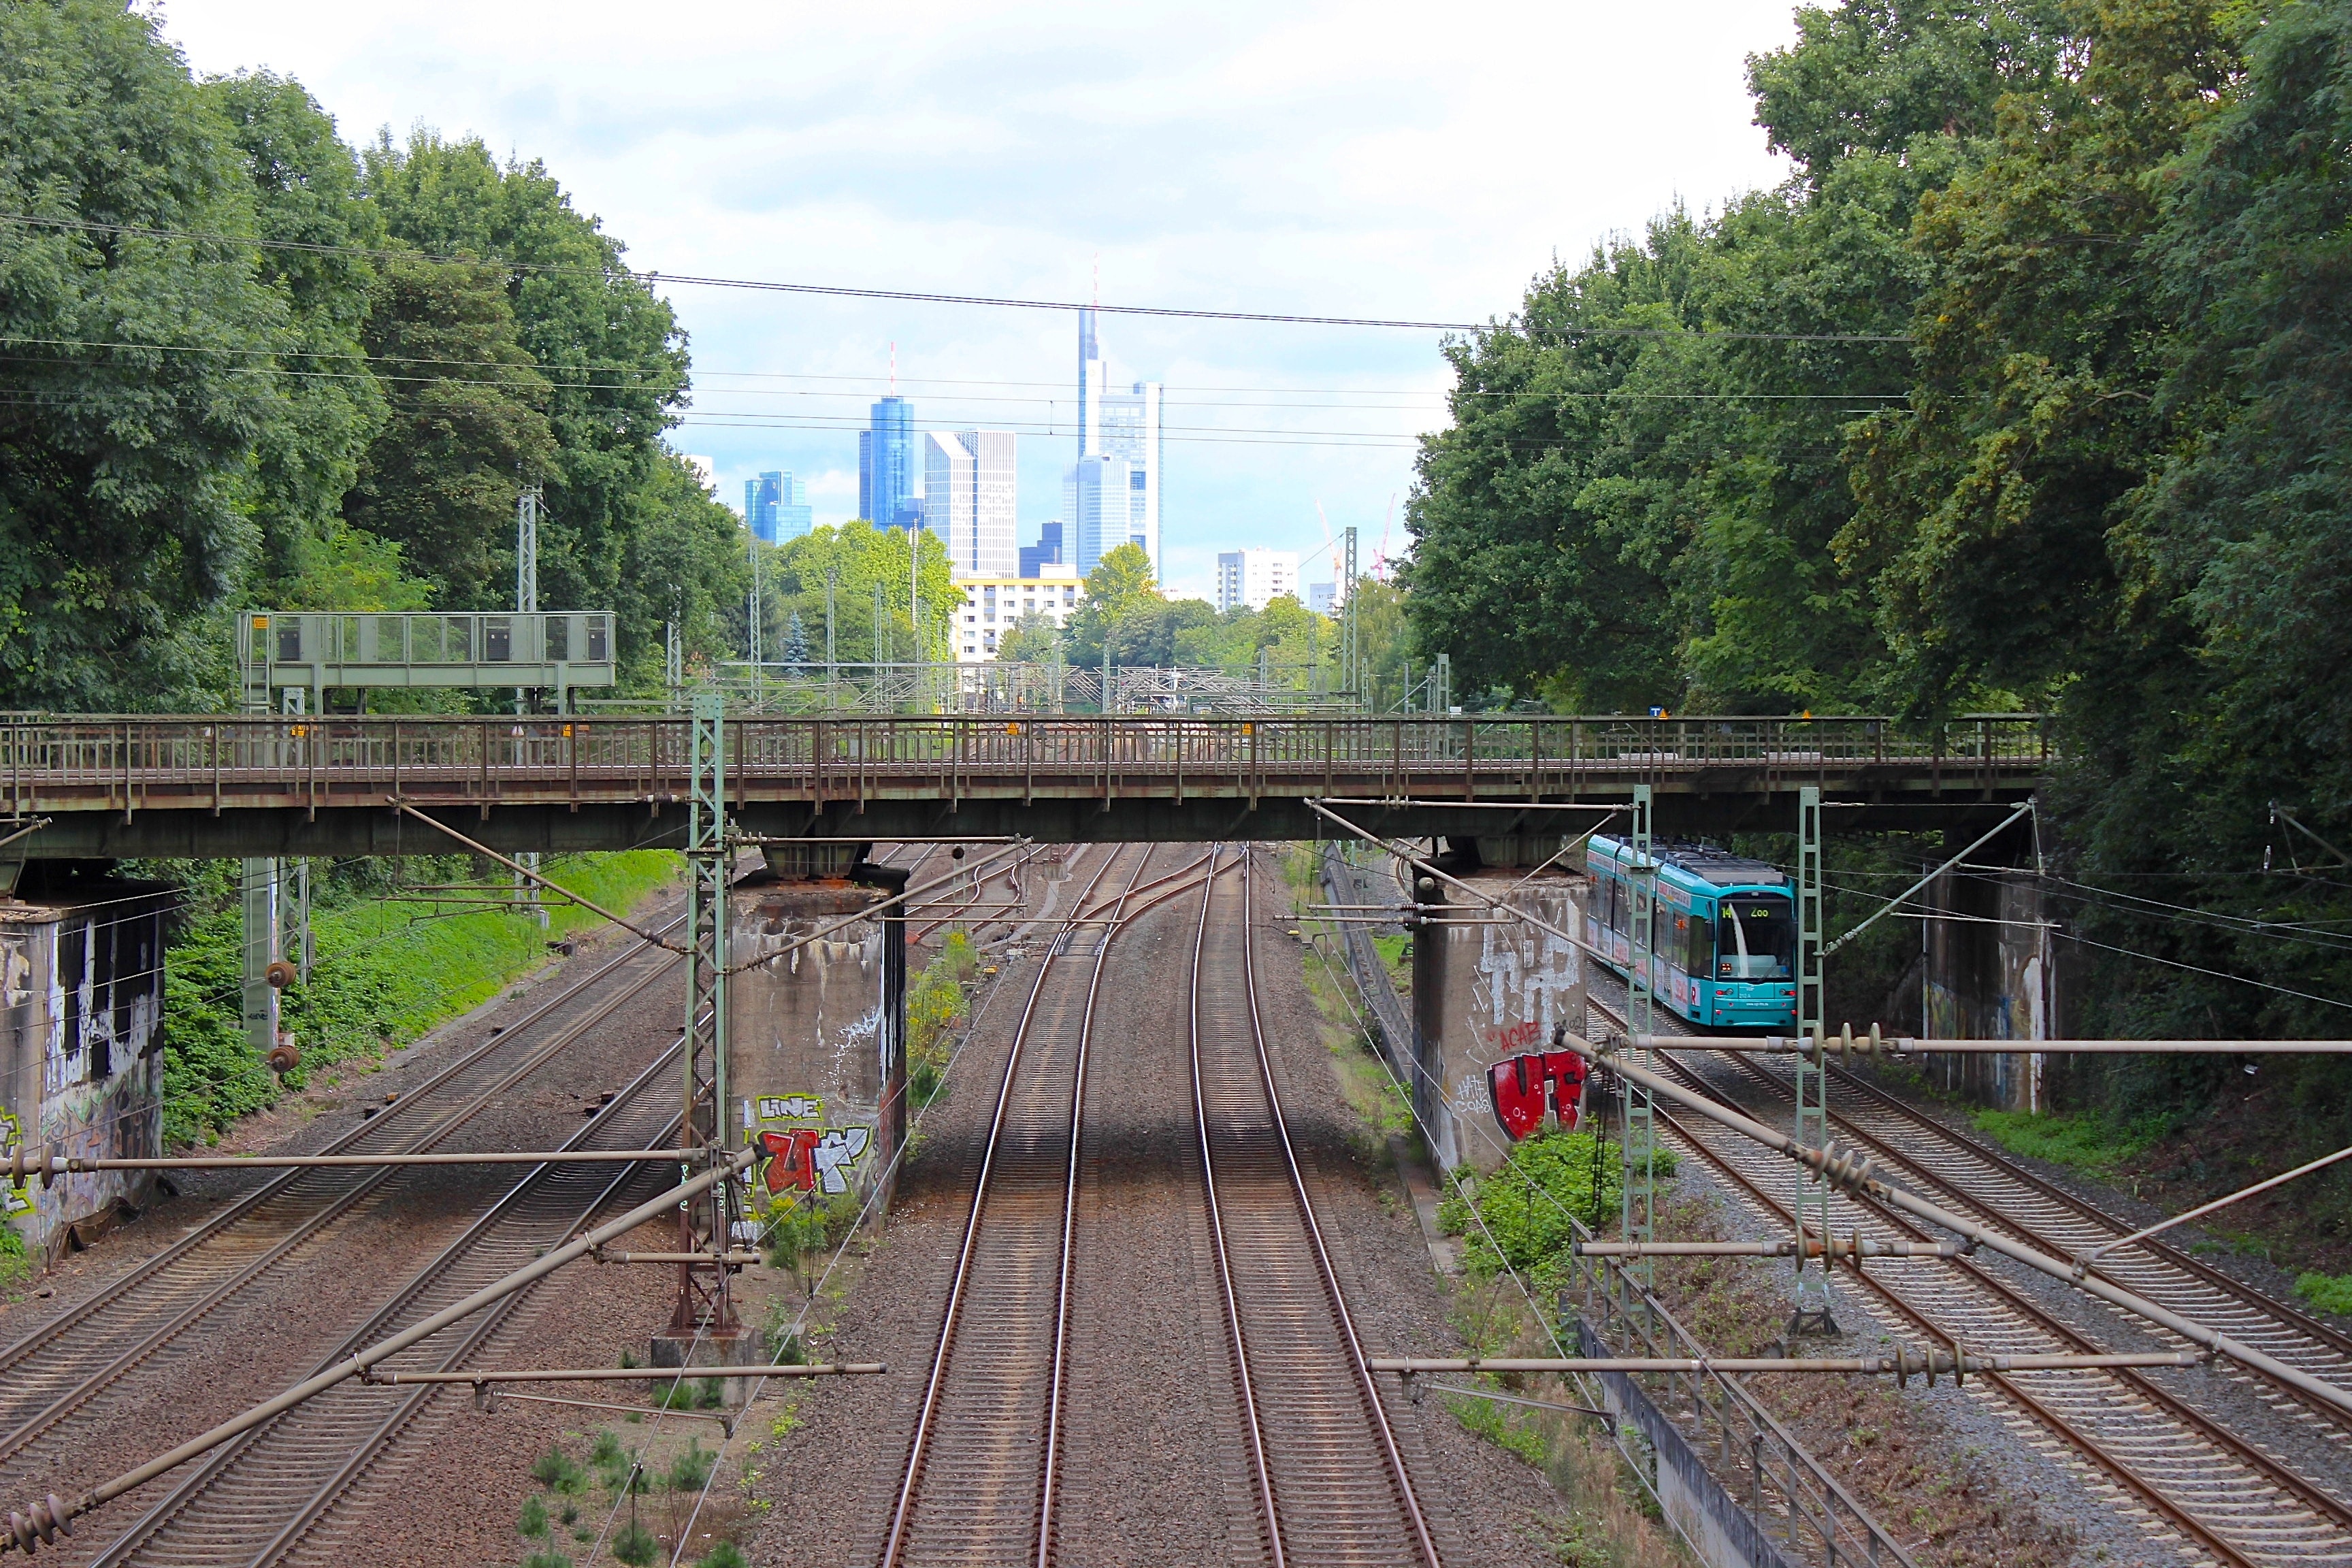 brown steel train rails over the bridge photoghrapy during daytime